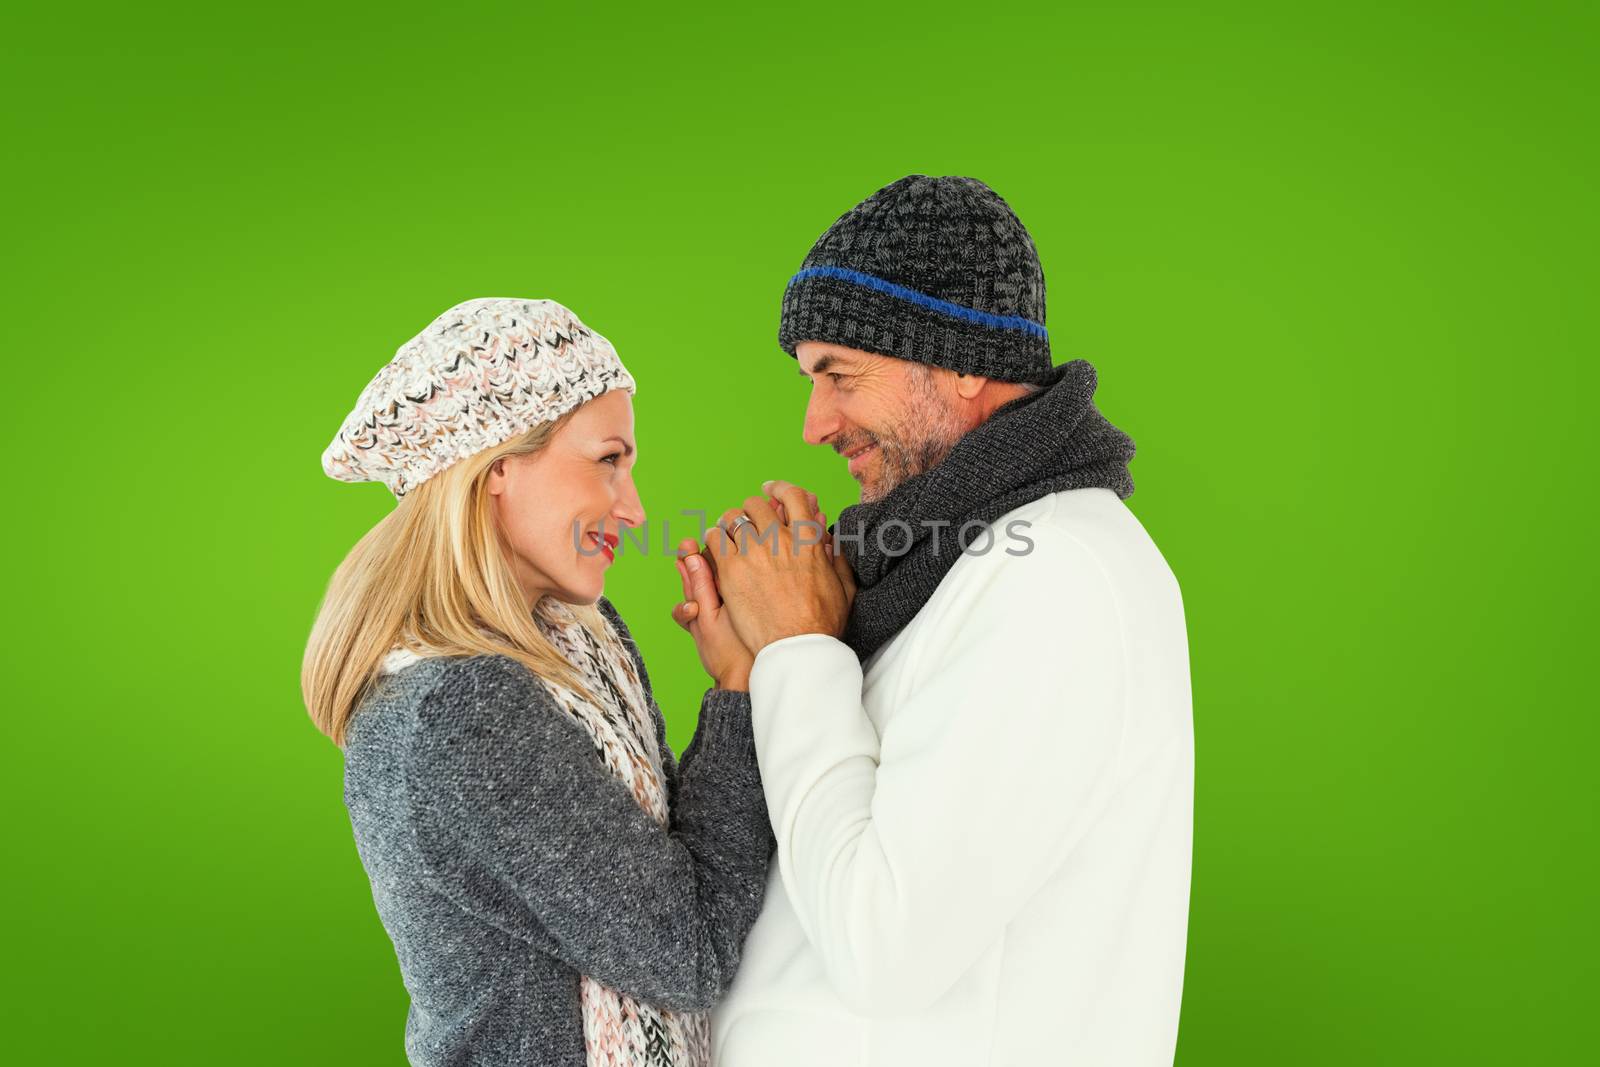 Couple in winter fashion embracing against green vignette